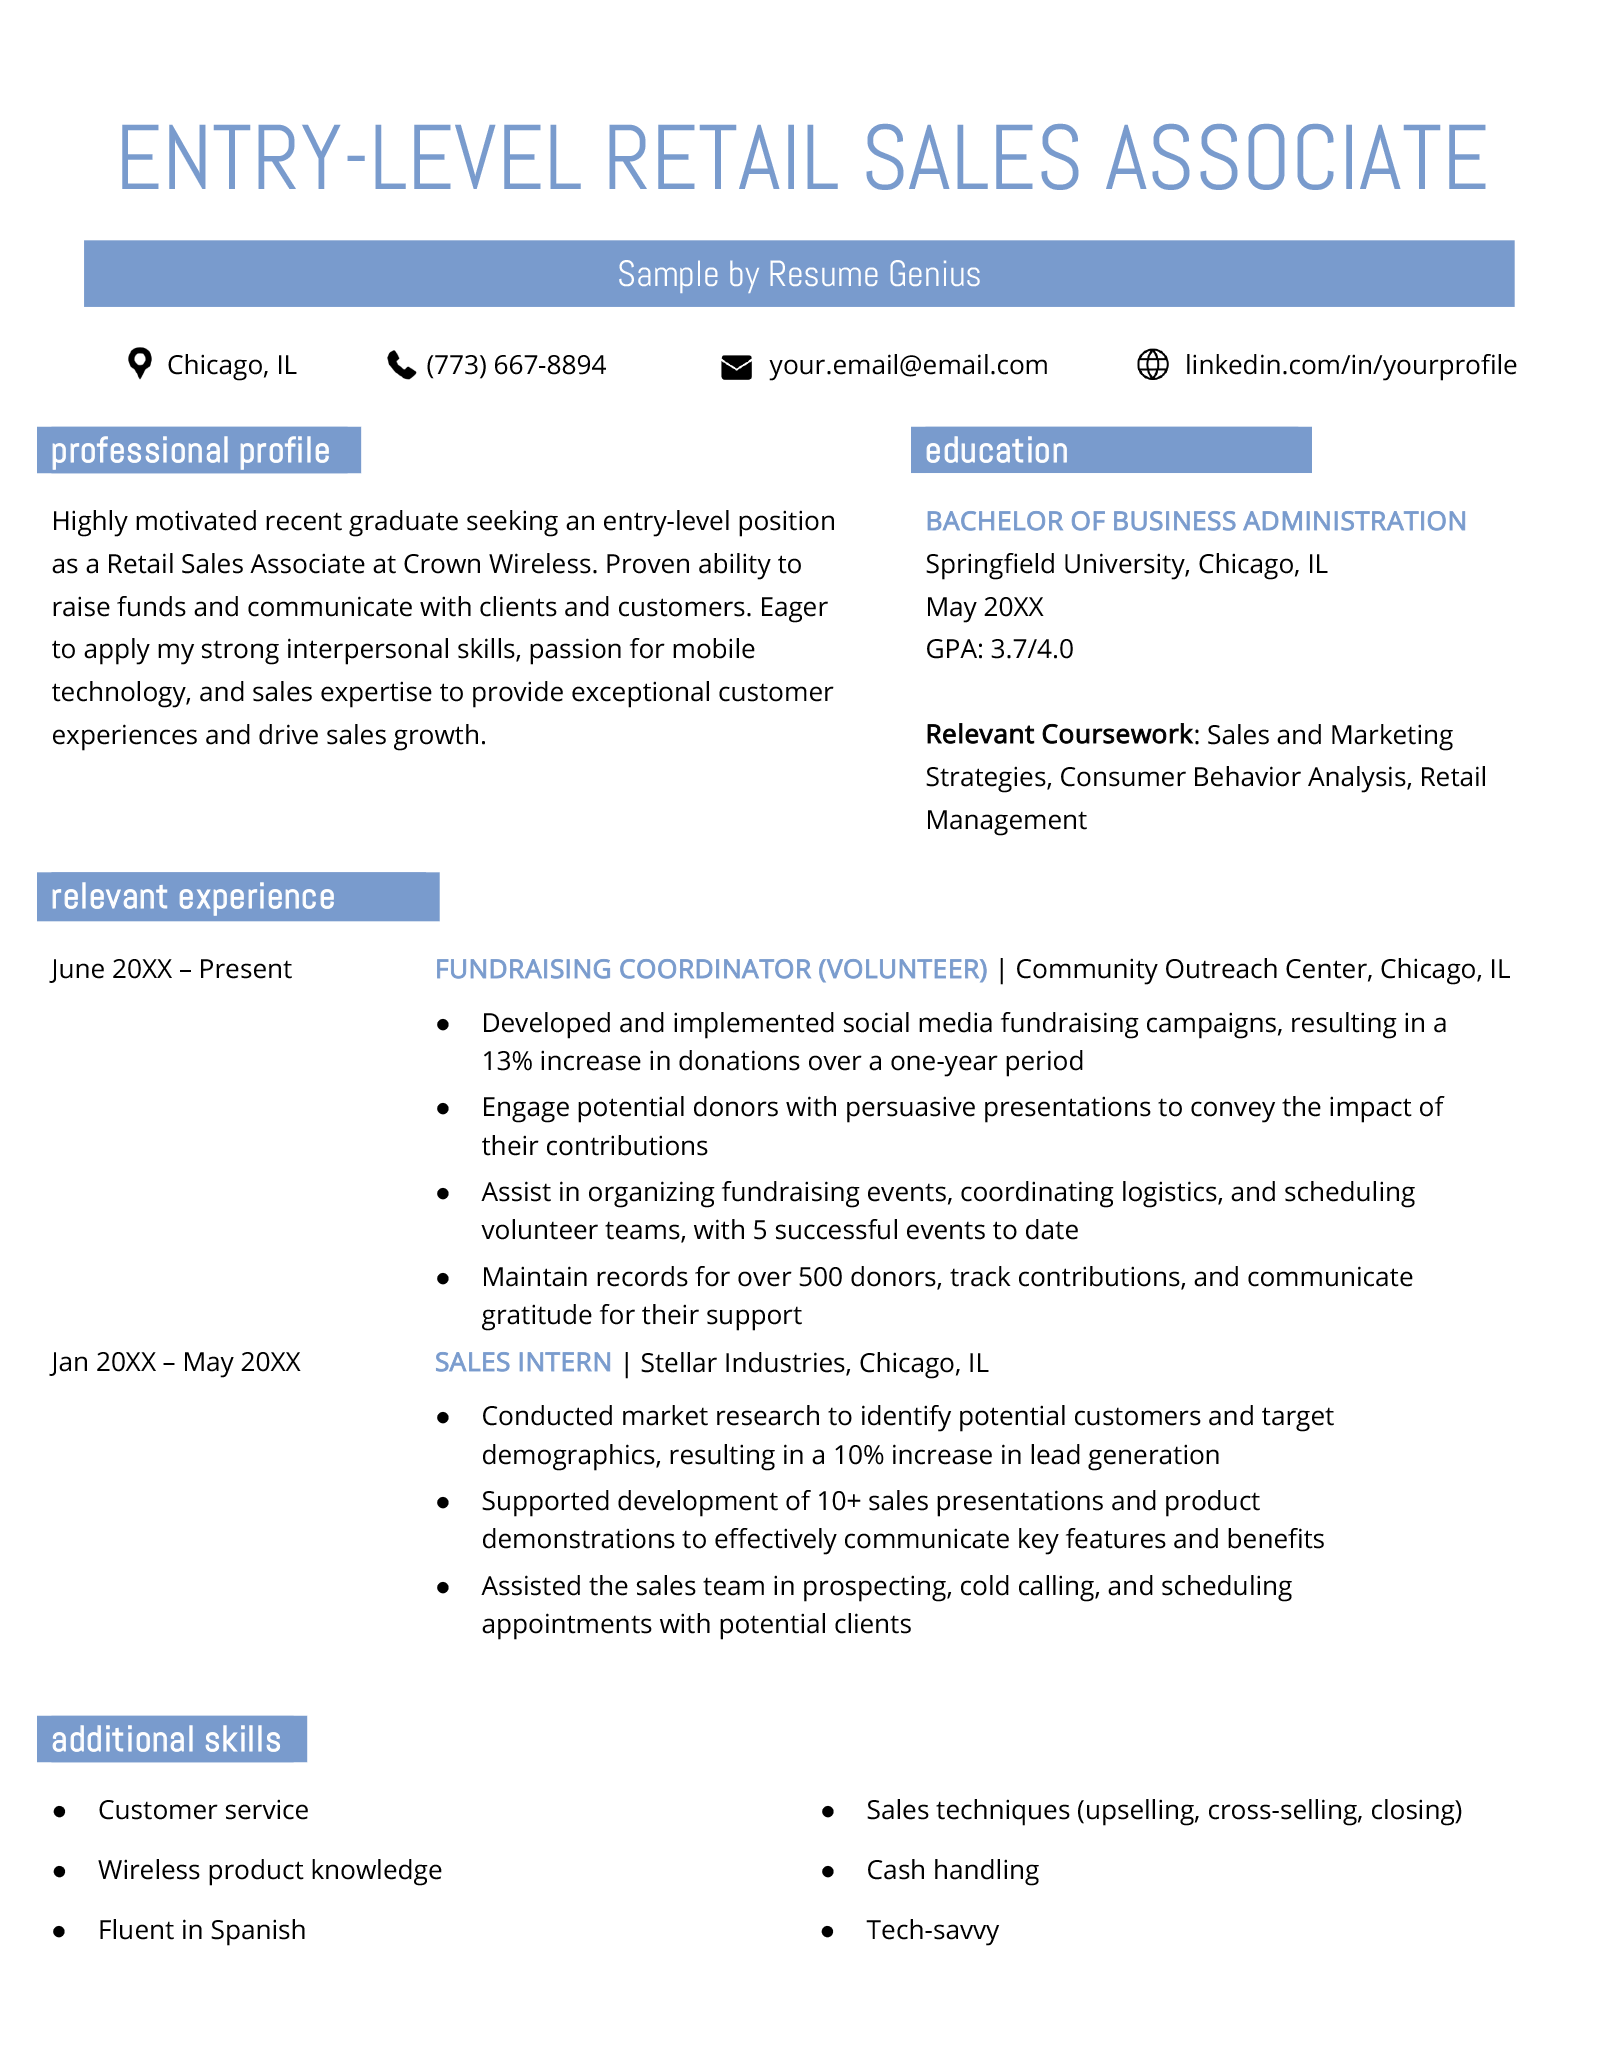 An example entry-level retail sales associate resume.